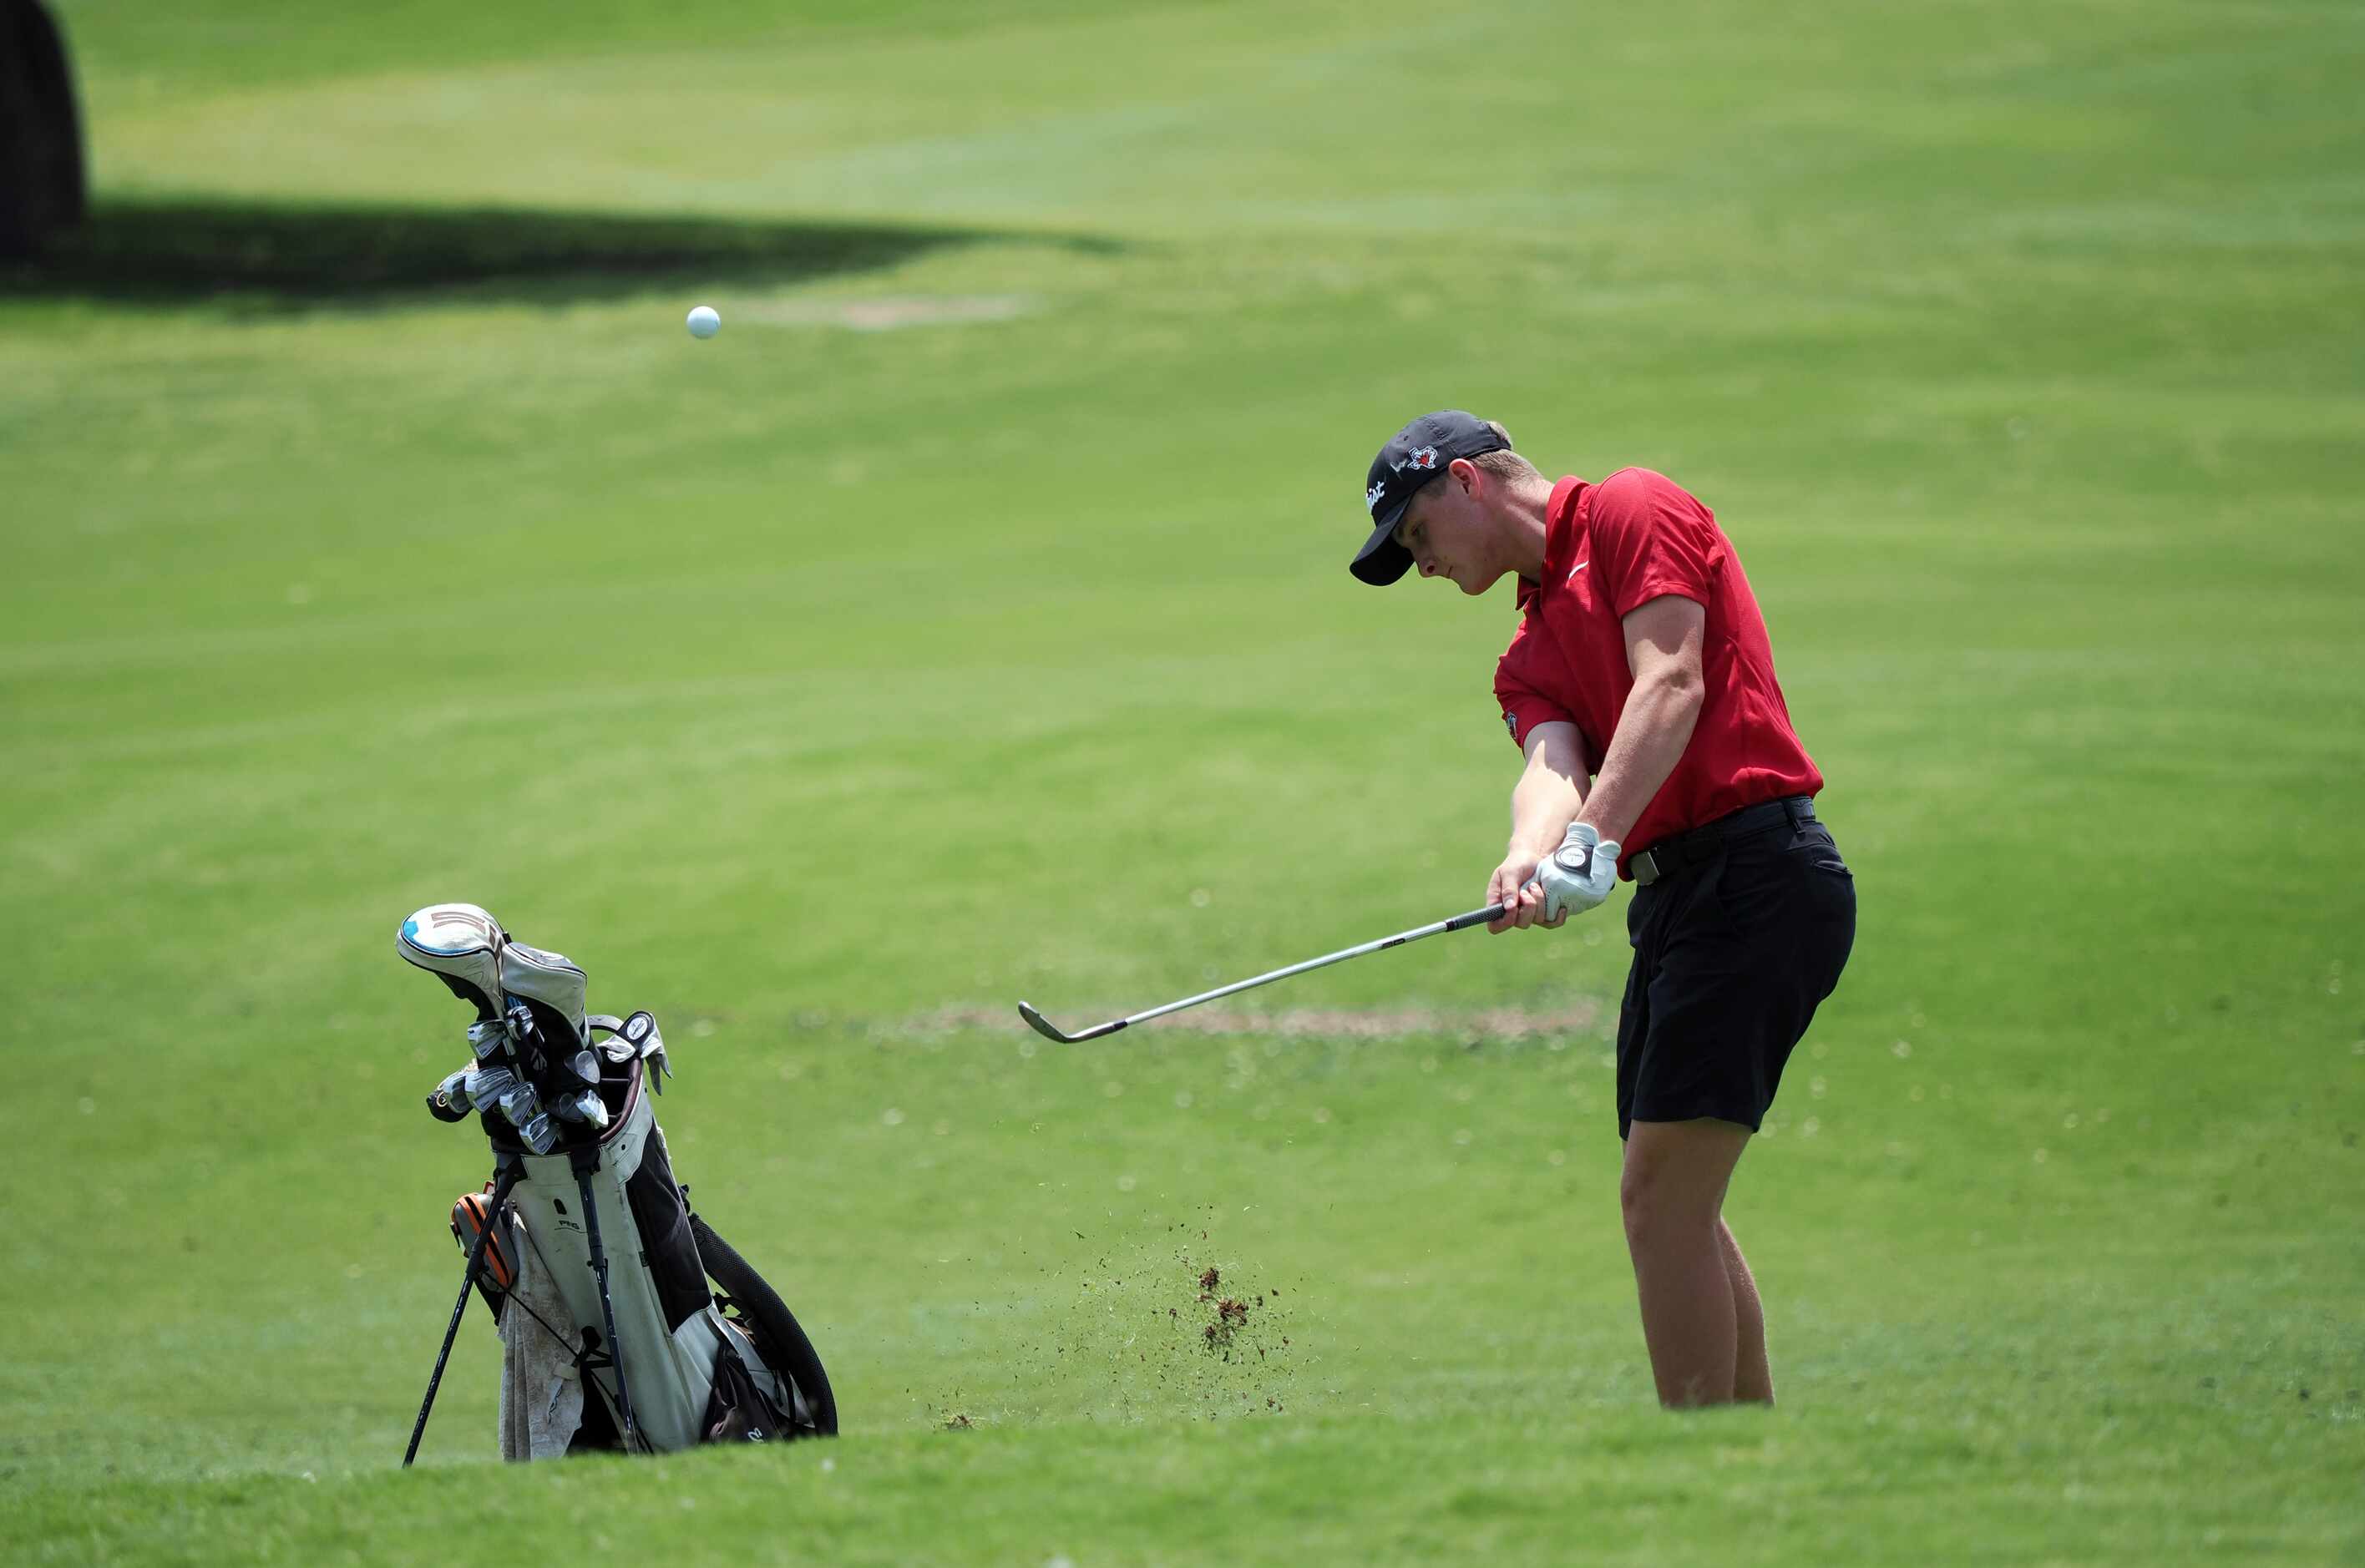 Argyle's Ethan Payne chips onto the green on #7 during round 2 of the UIL Boy’s High School...